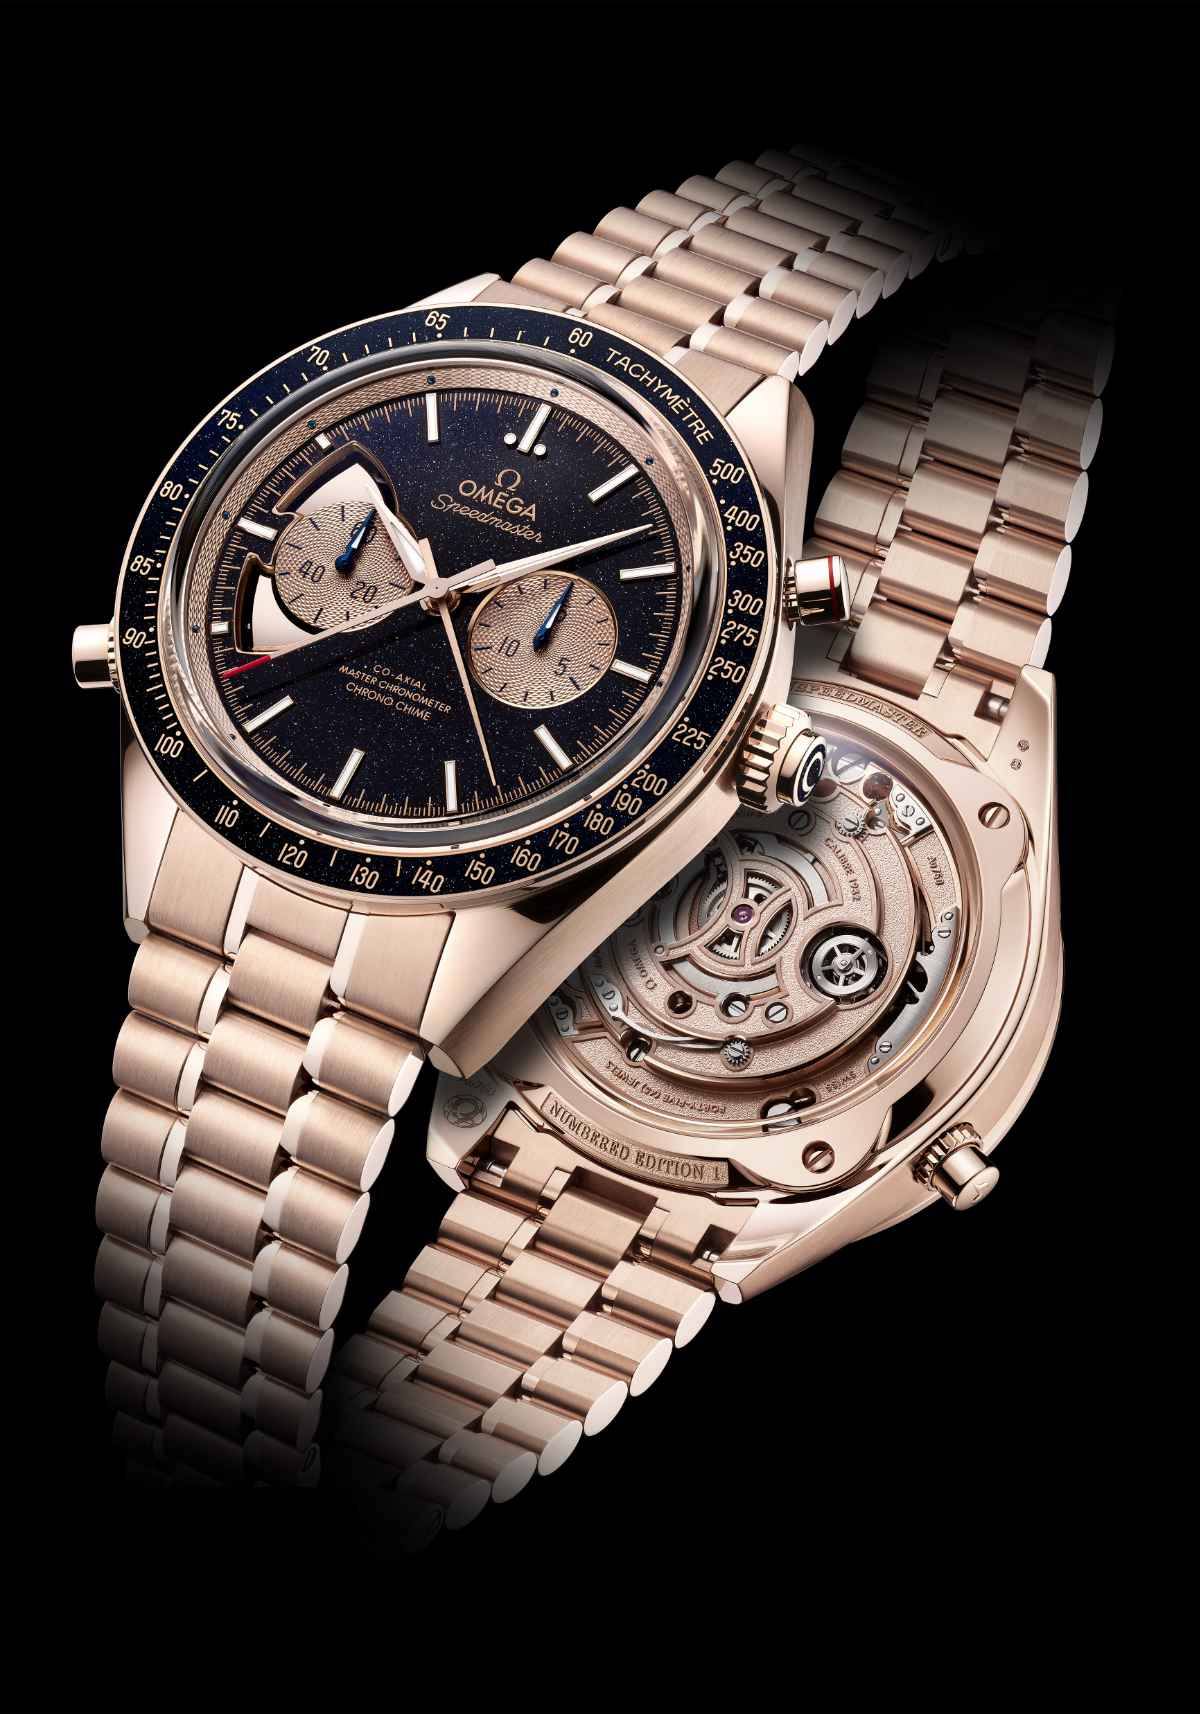 The Omega Chrono Chime - World-Changing Calibre Powers Sweet-Sounding Masterpieces